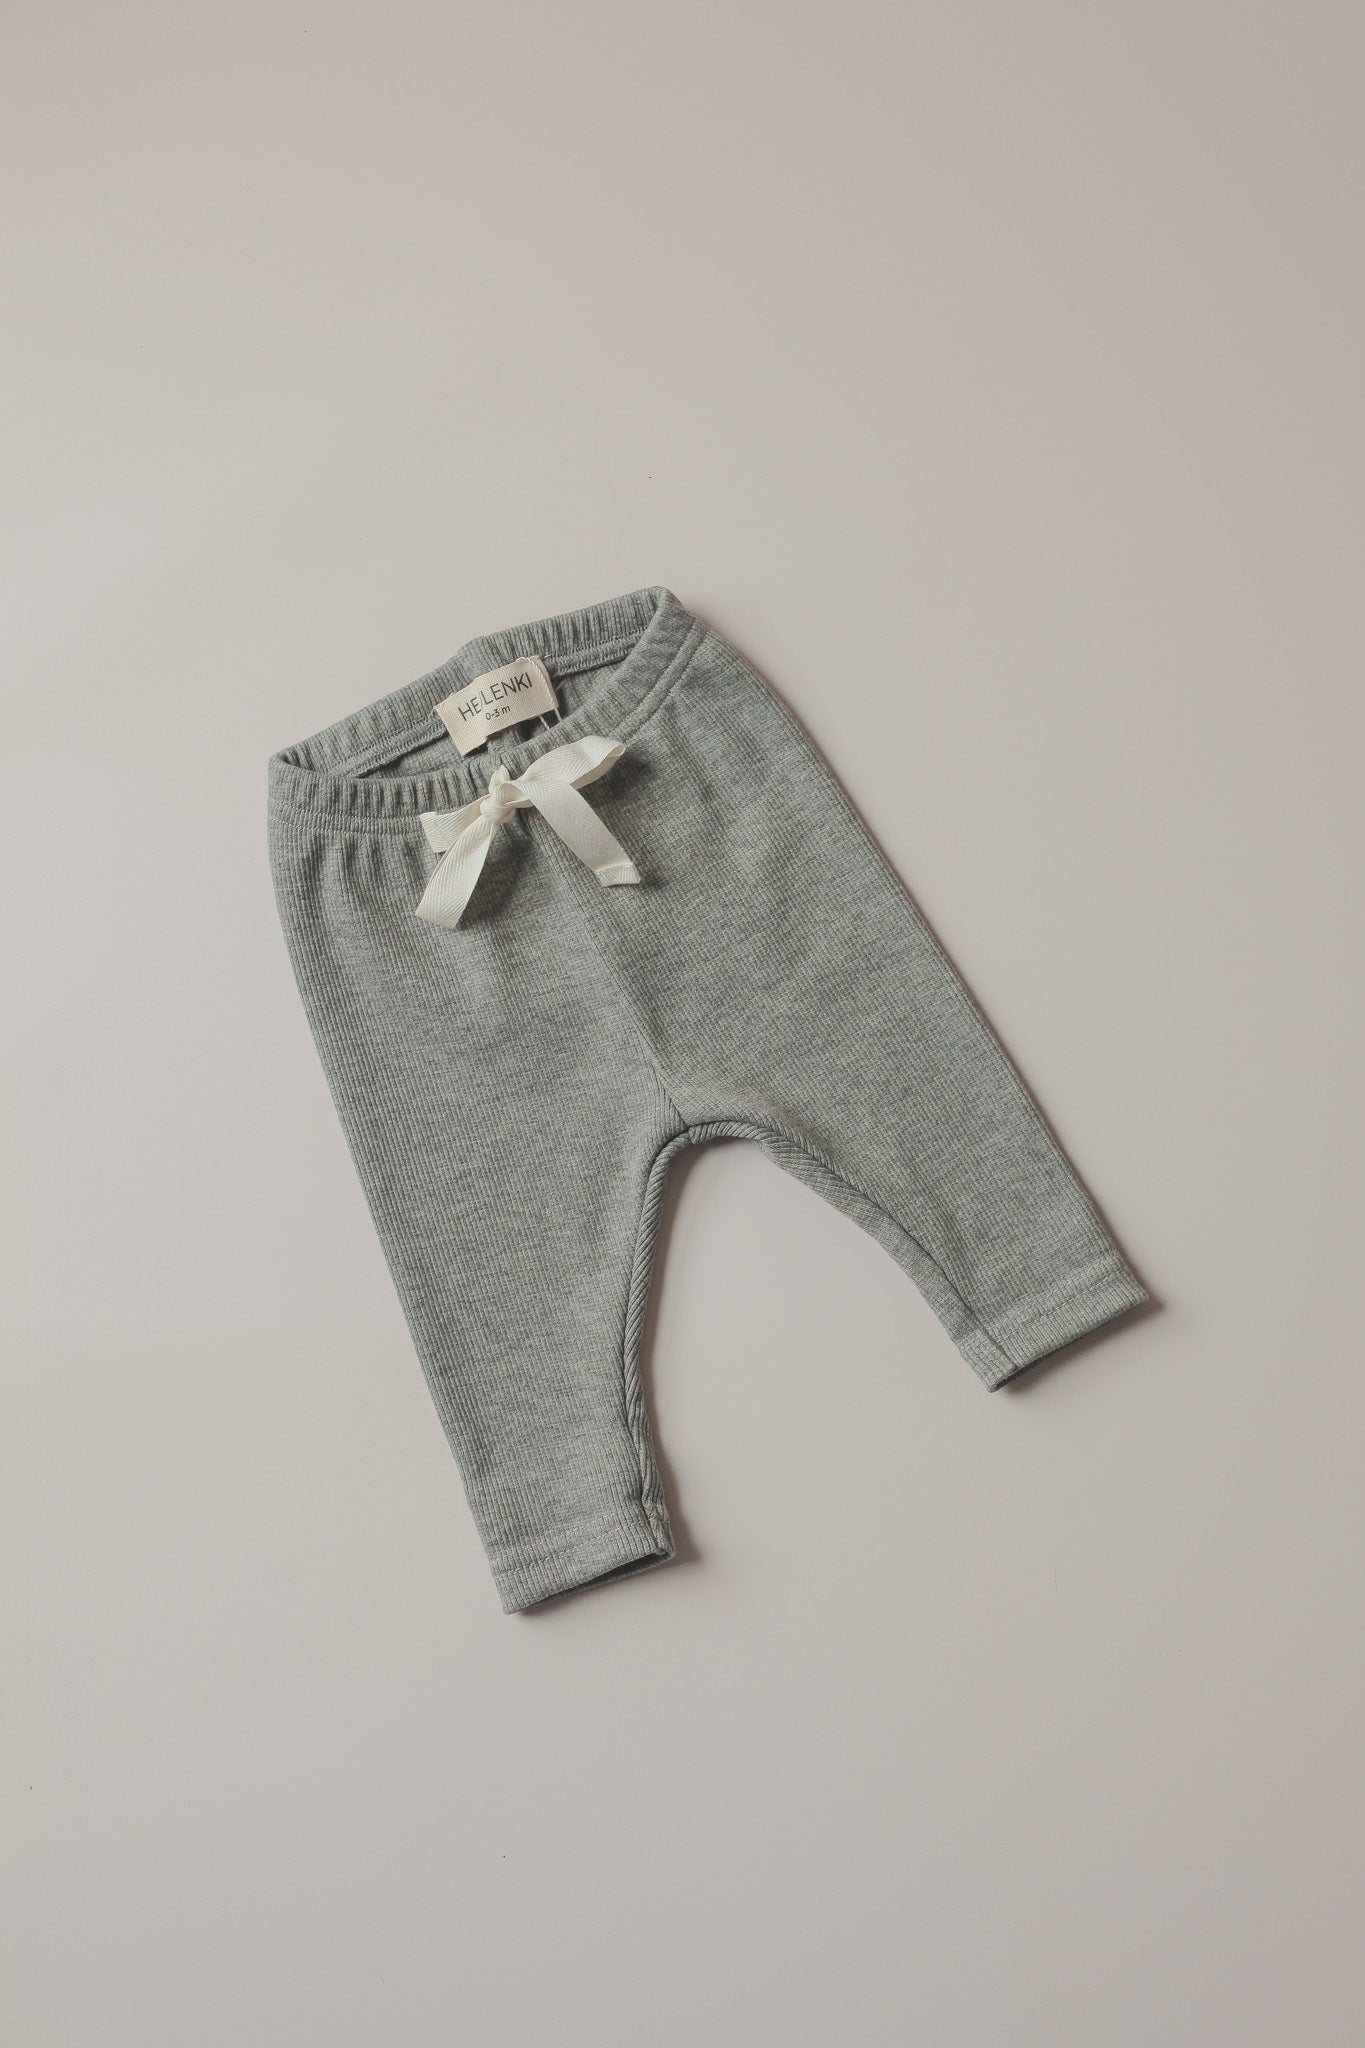 Cotton Rib Legging in Grey by Happy Princess Online, THE ICONIC